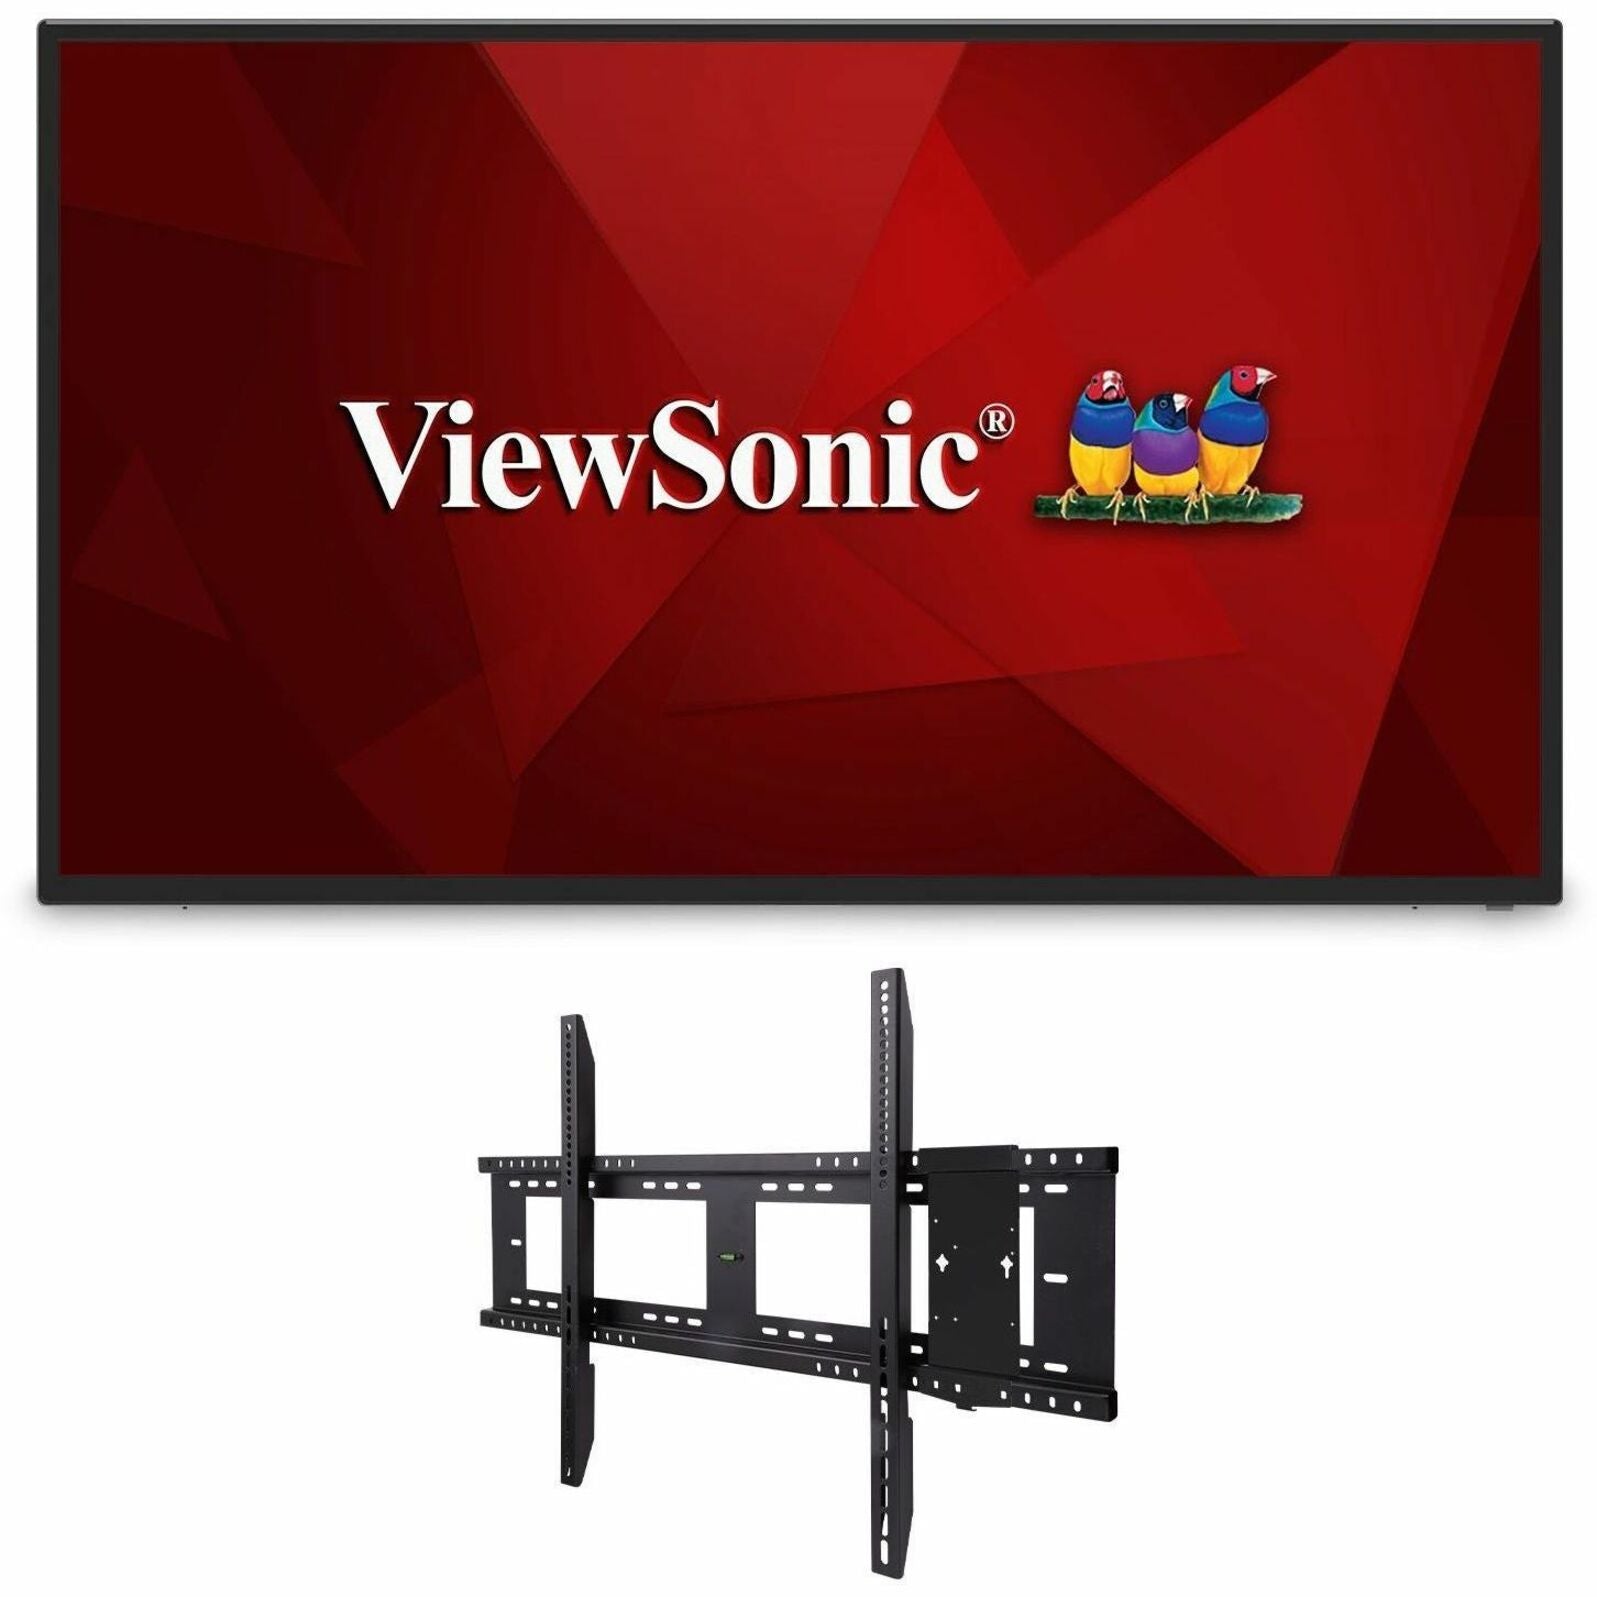 ViewSonic CDE4312-E1 Digital Signage Display - 4K, Integrated Software and Fixed Wall Mount